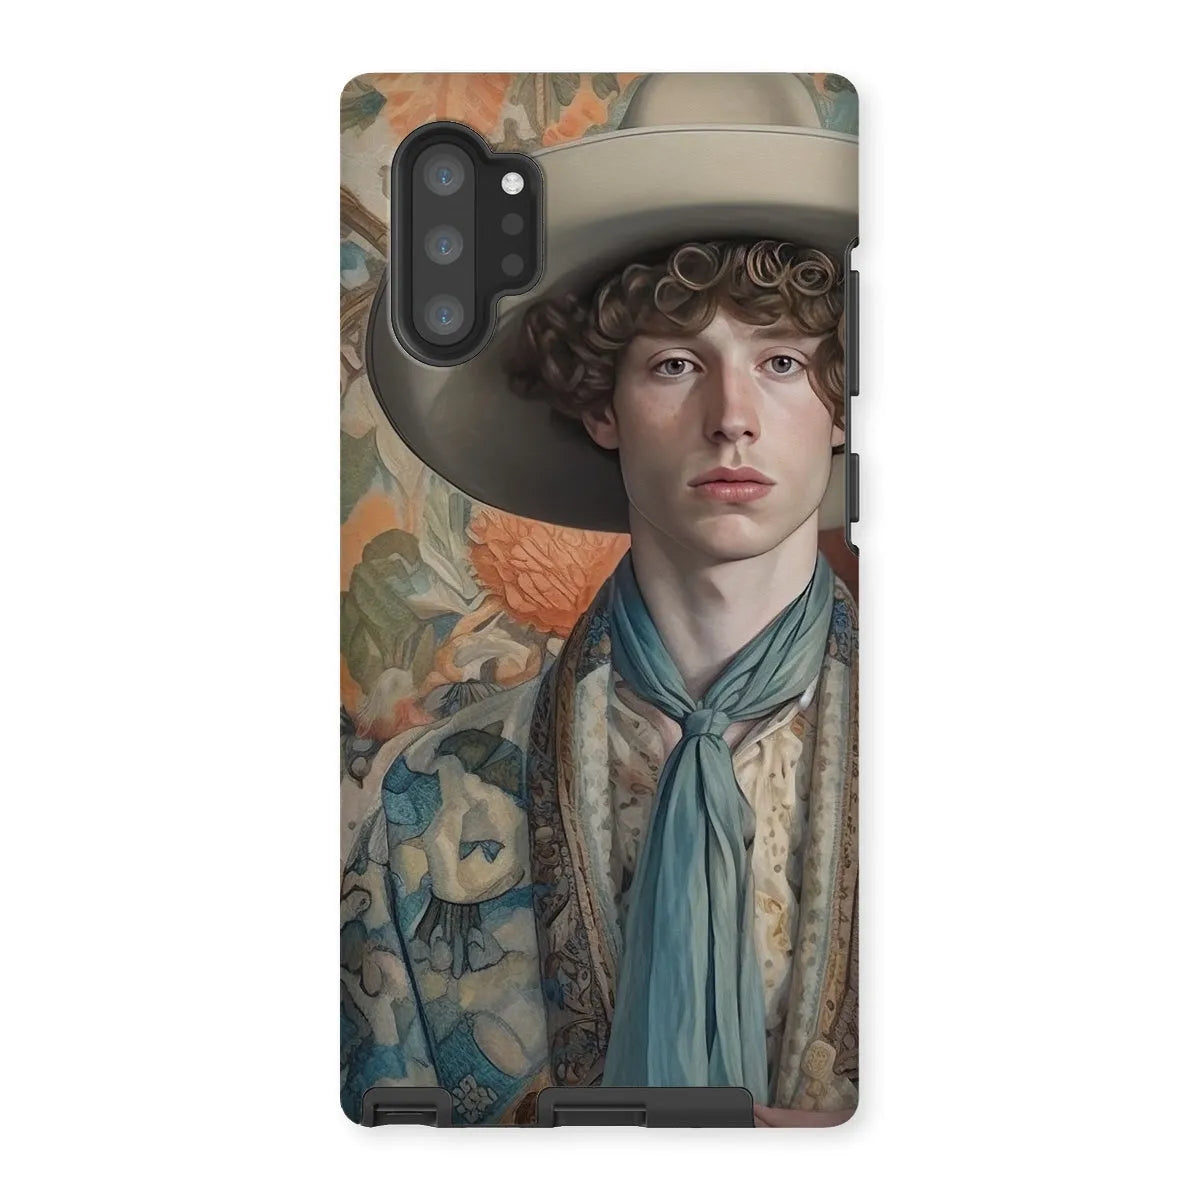 Theodore The Gay Cowboy - Dandy Gay Men Art Phone Case - Samsung Galaxy Note 10p / Matte - Mobile Phone Cases